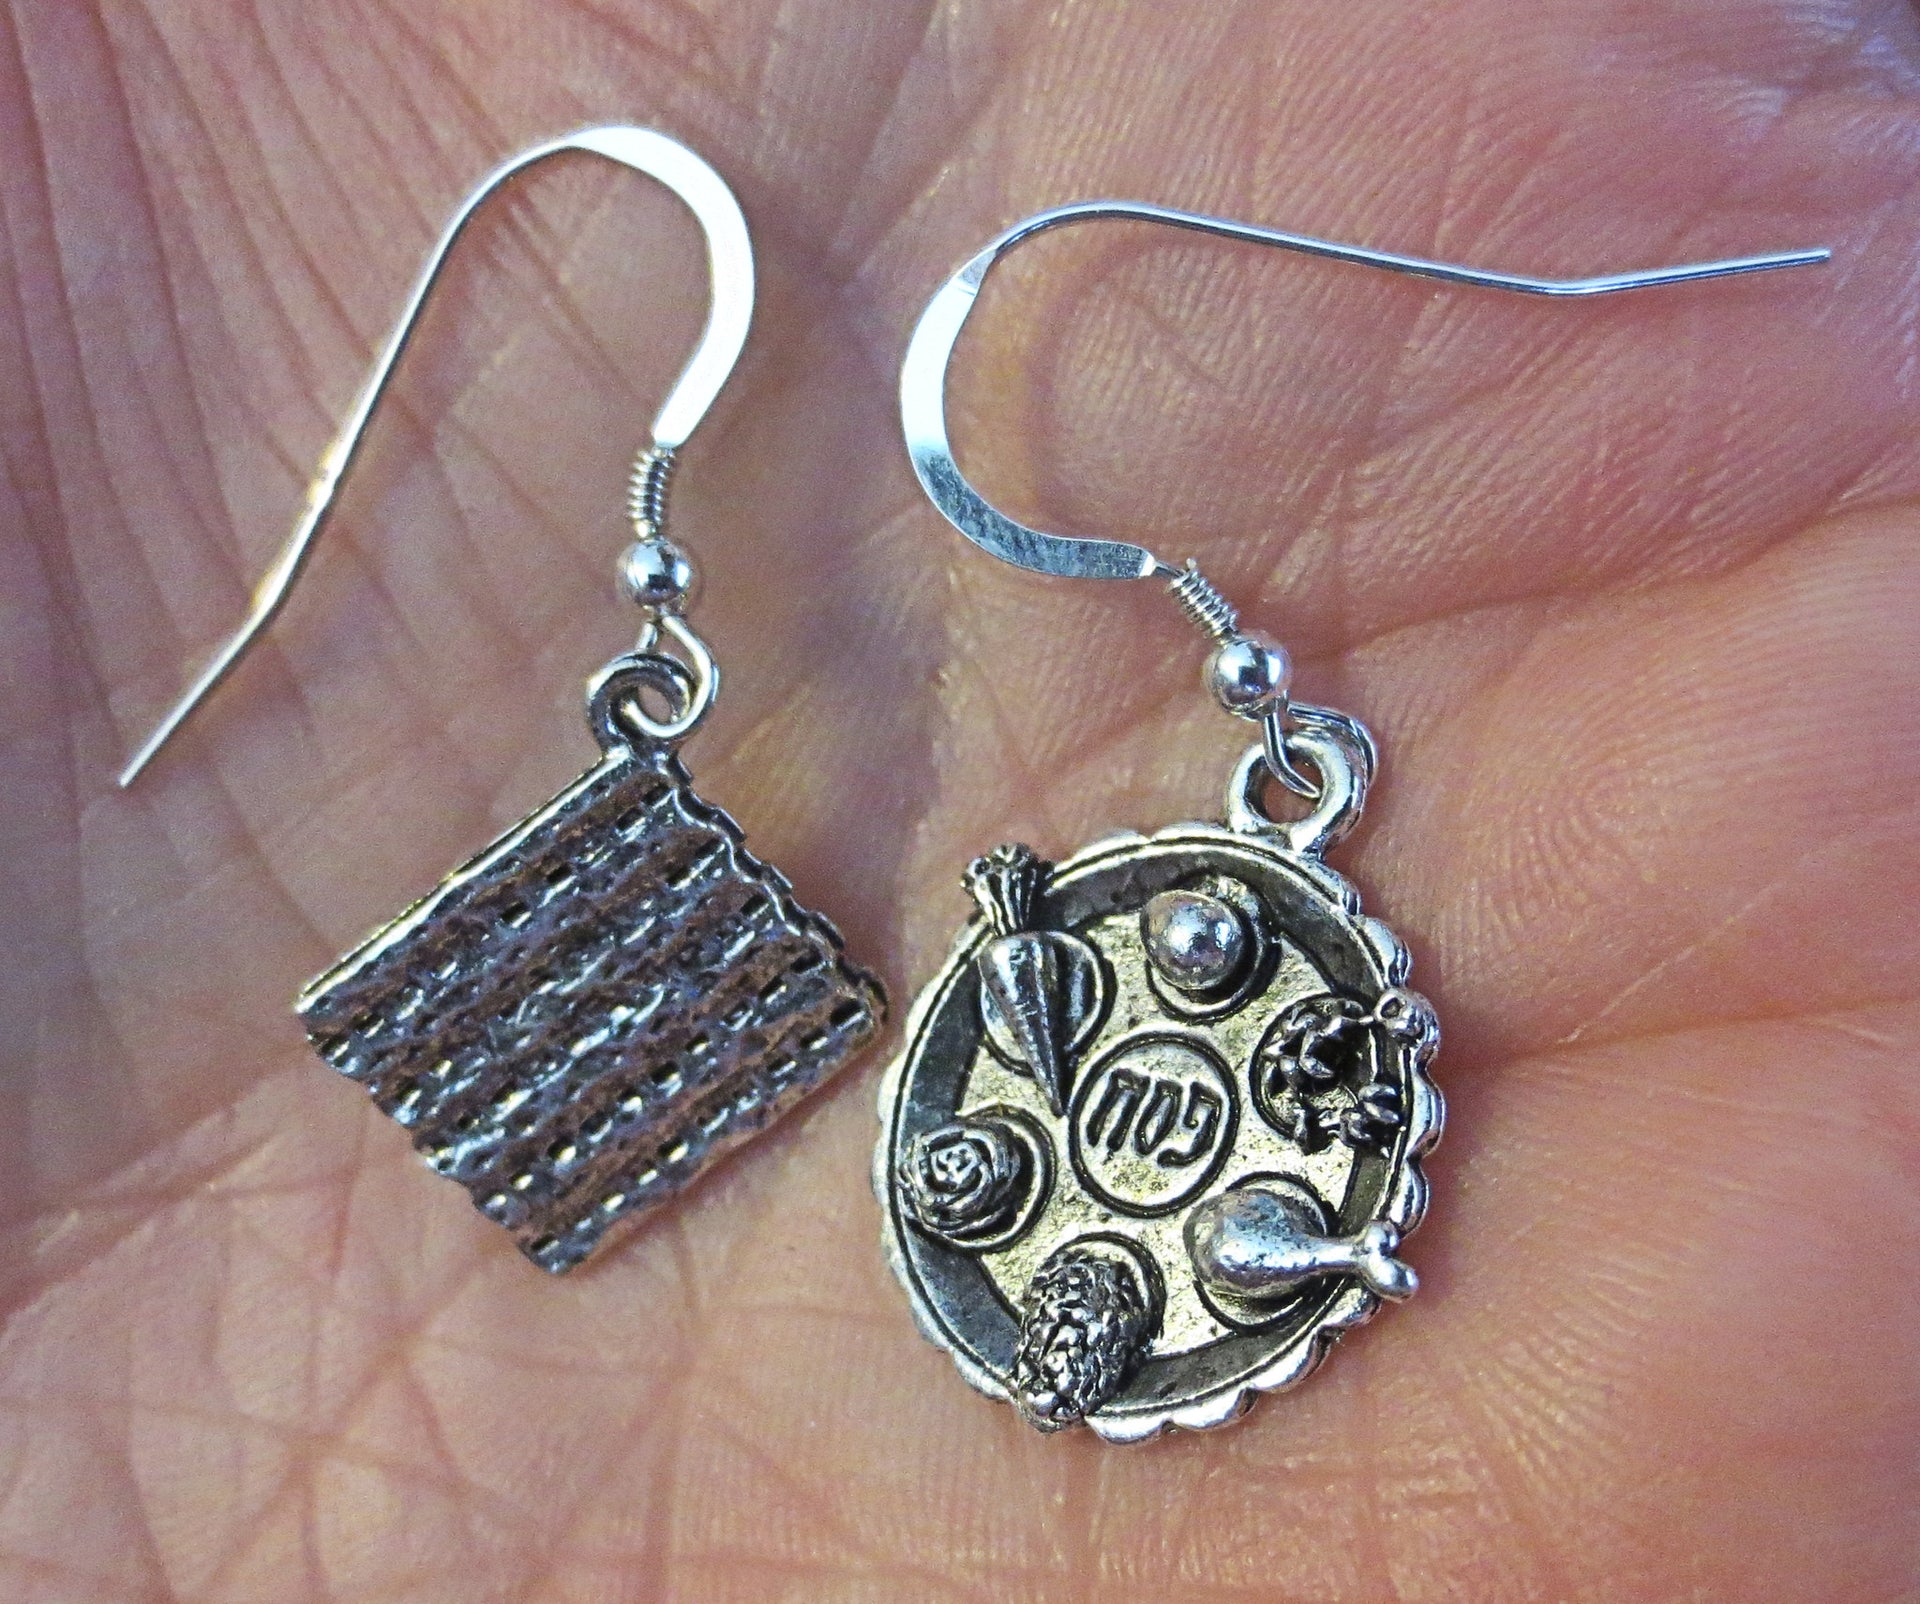 passover theme silver earrings one seder plate one matzah / sterling silver wires